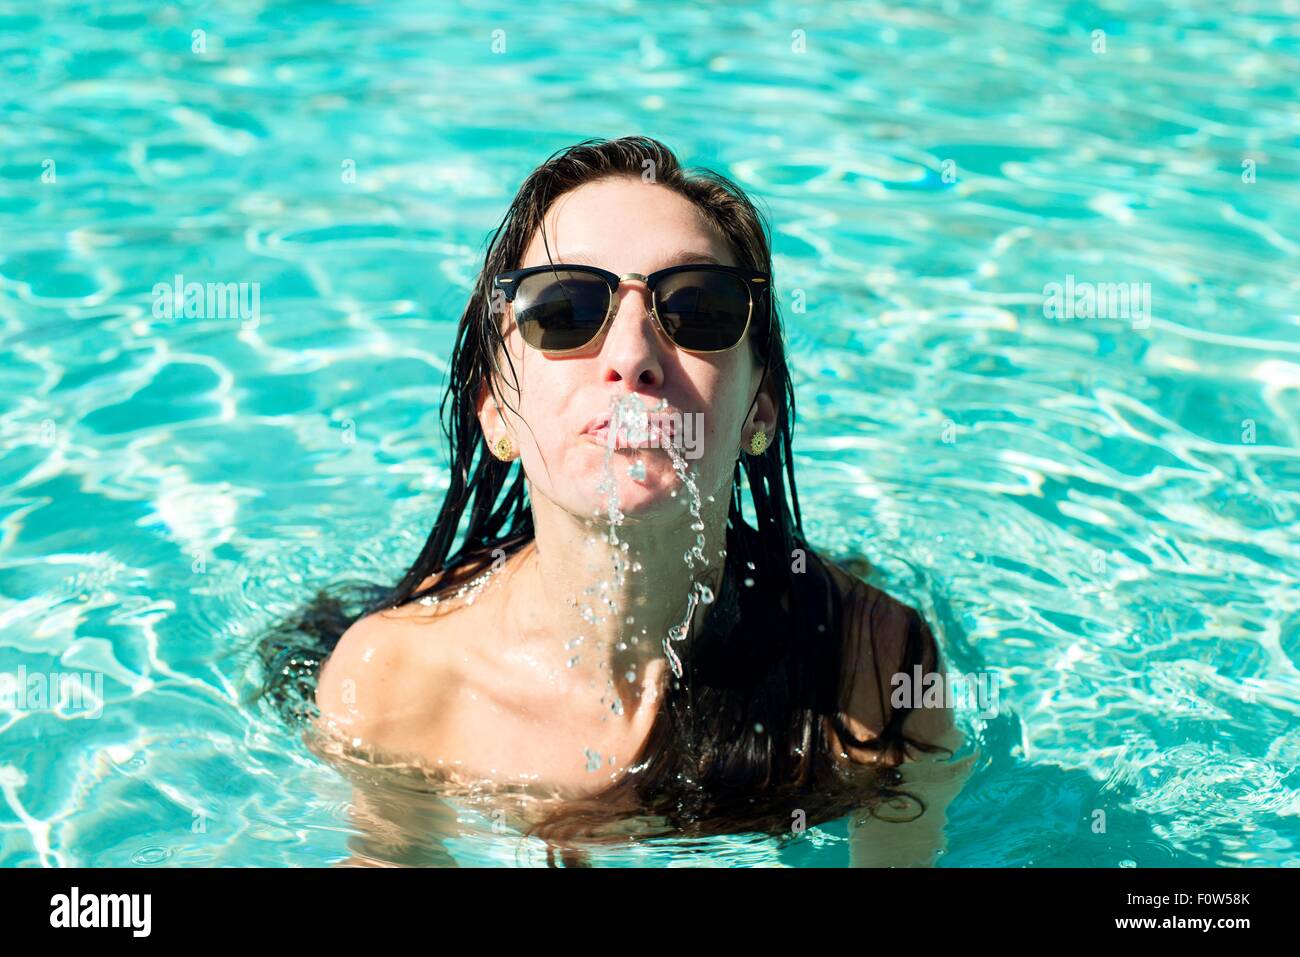 Portrait of young woman in swimming pool squirting water from mouth Stock Photo